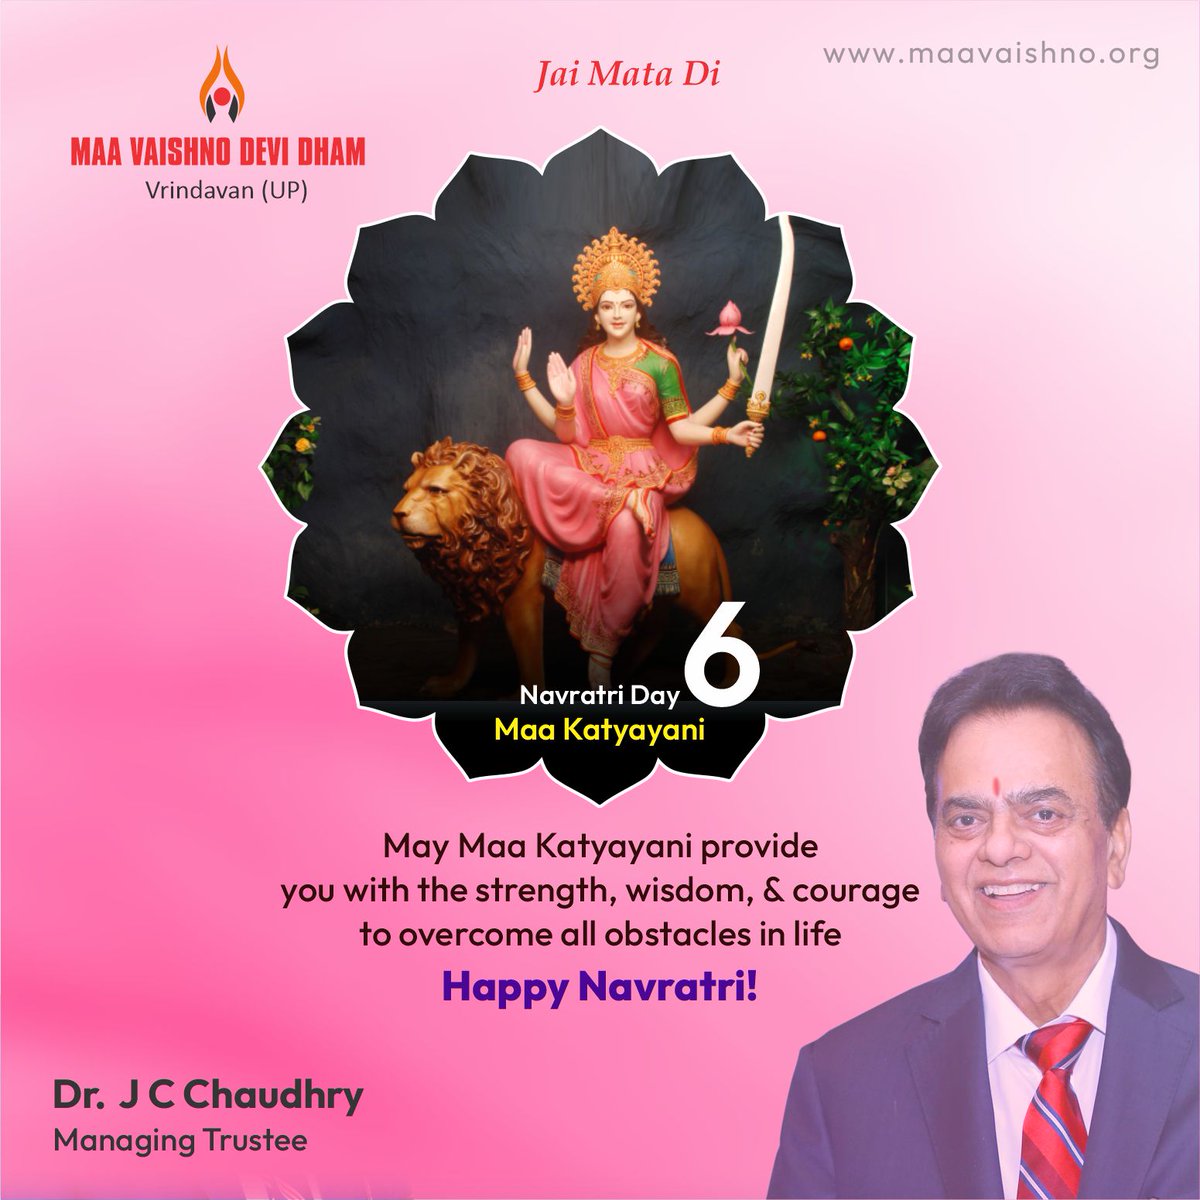 Navratri Day 6
May Maa Katyayani provide you strength, wisdom, & courage to overcome all obstacles in life

#navratri2023 #navratrispecial #navratrifestival #jcchaudhry